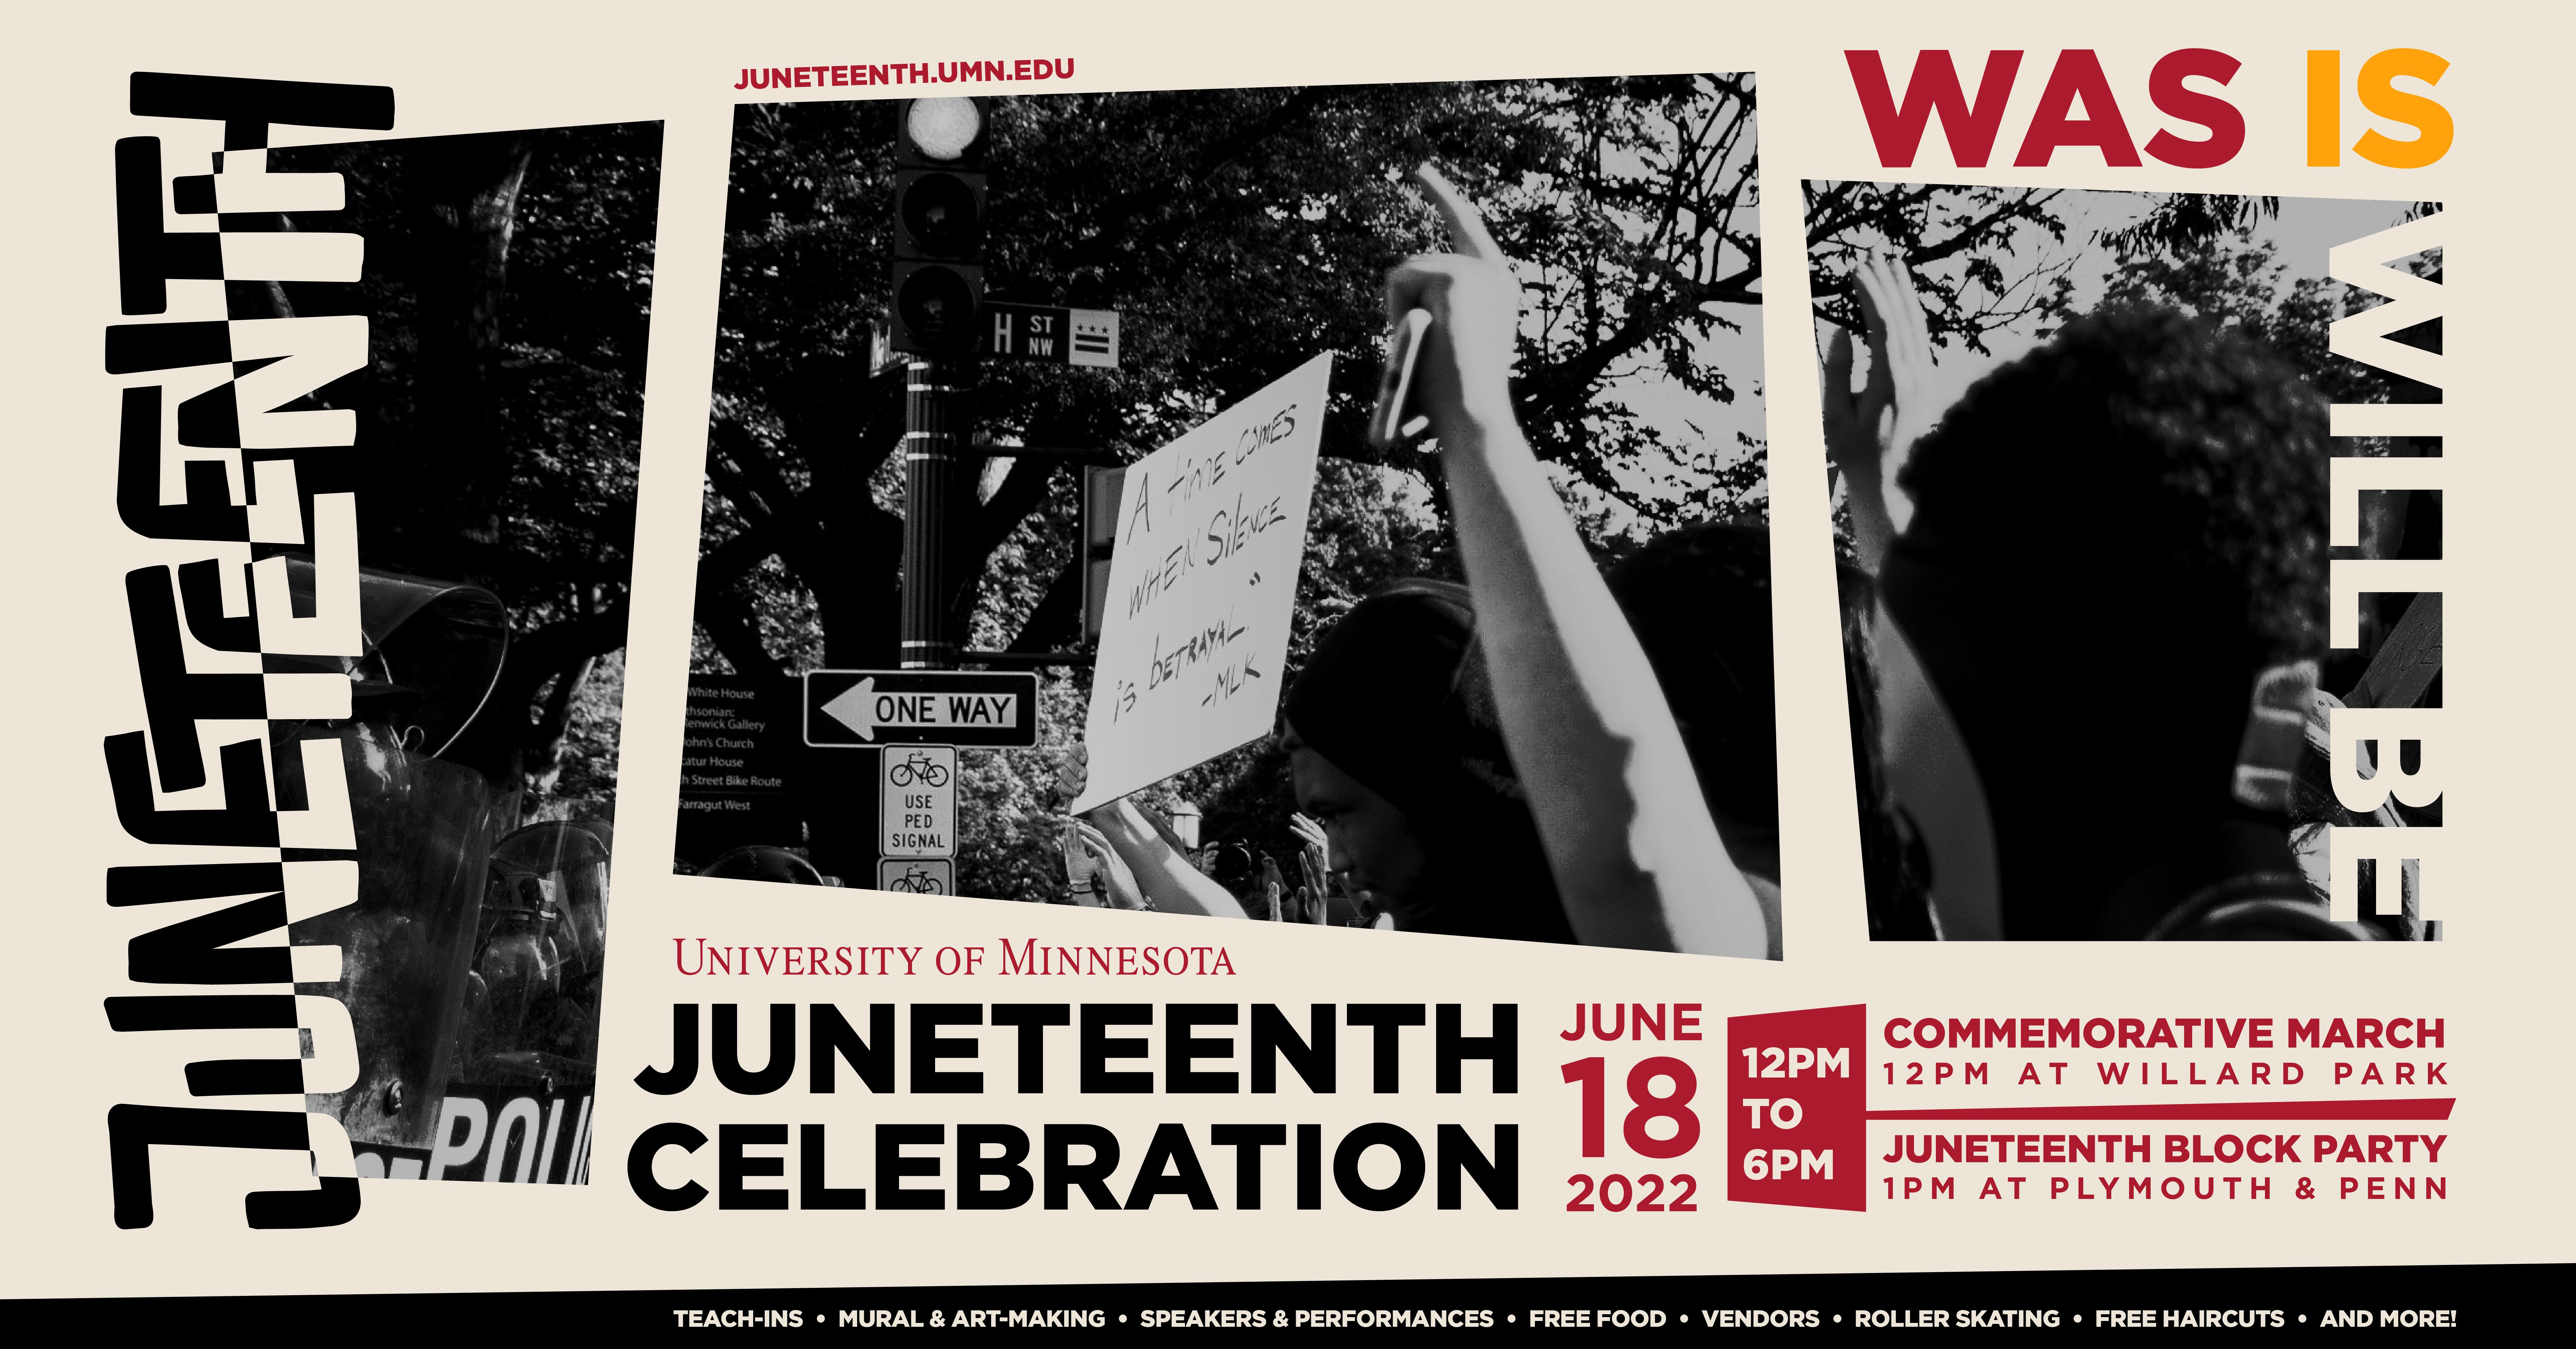 An image of the 2022 Juneteenth celebration